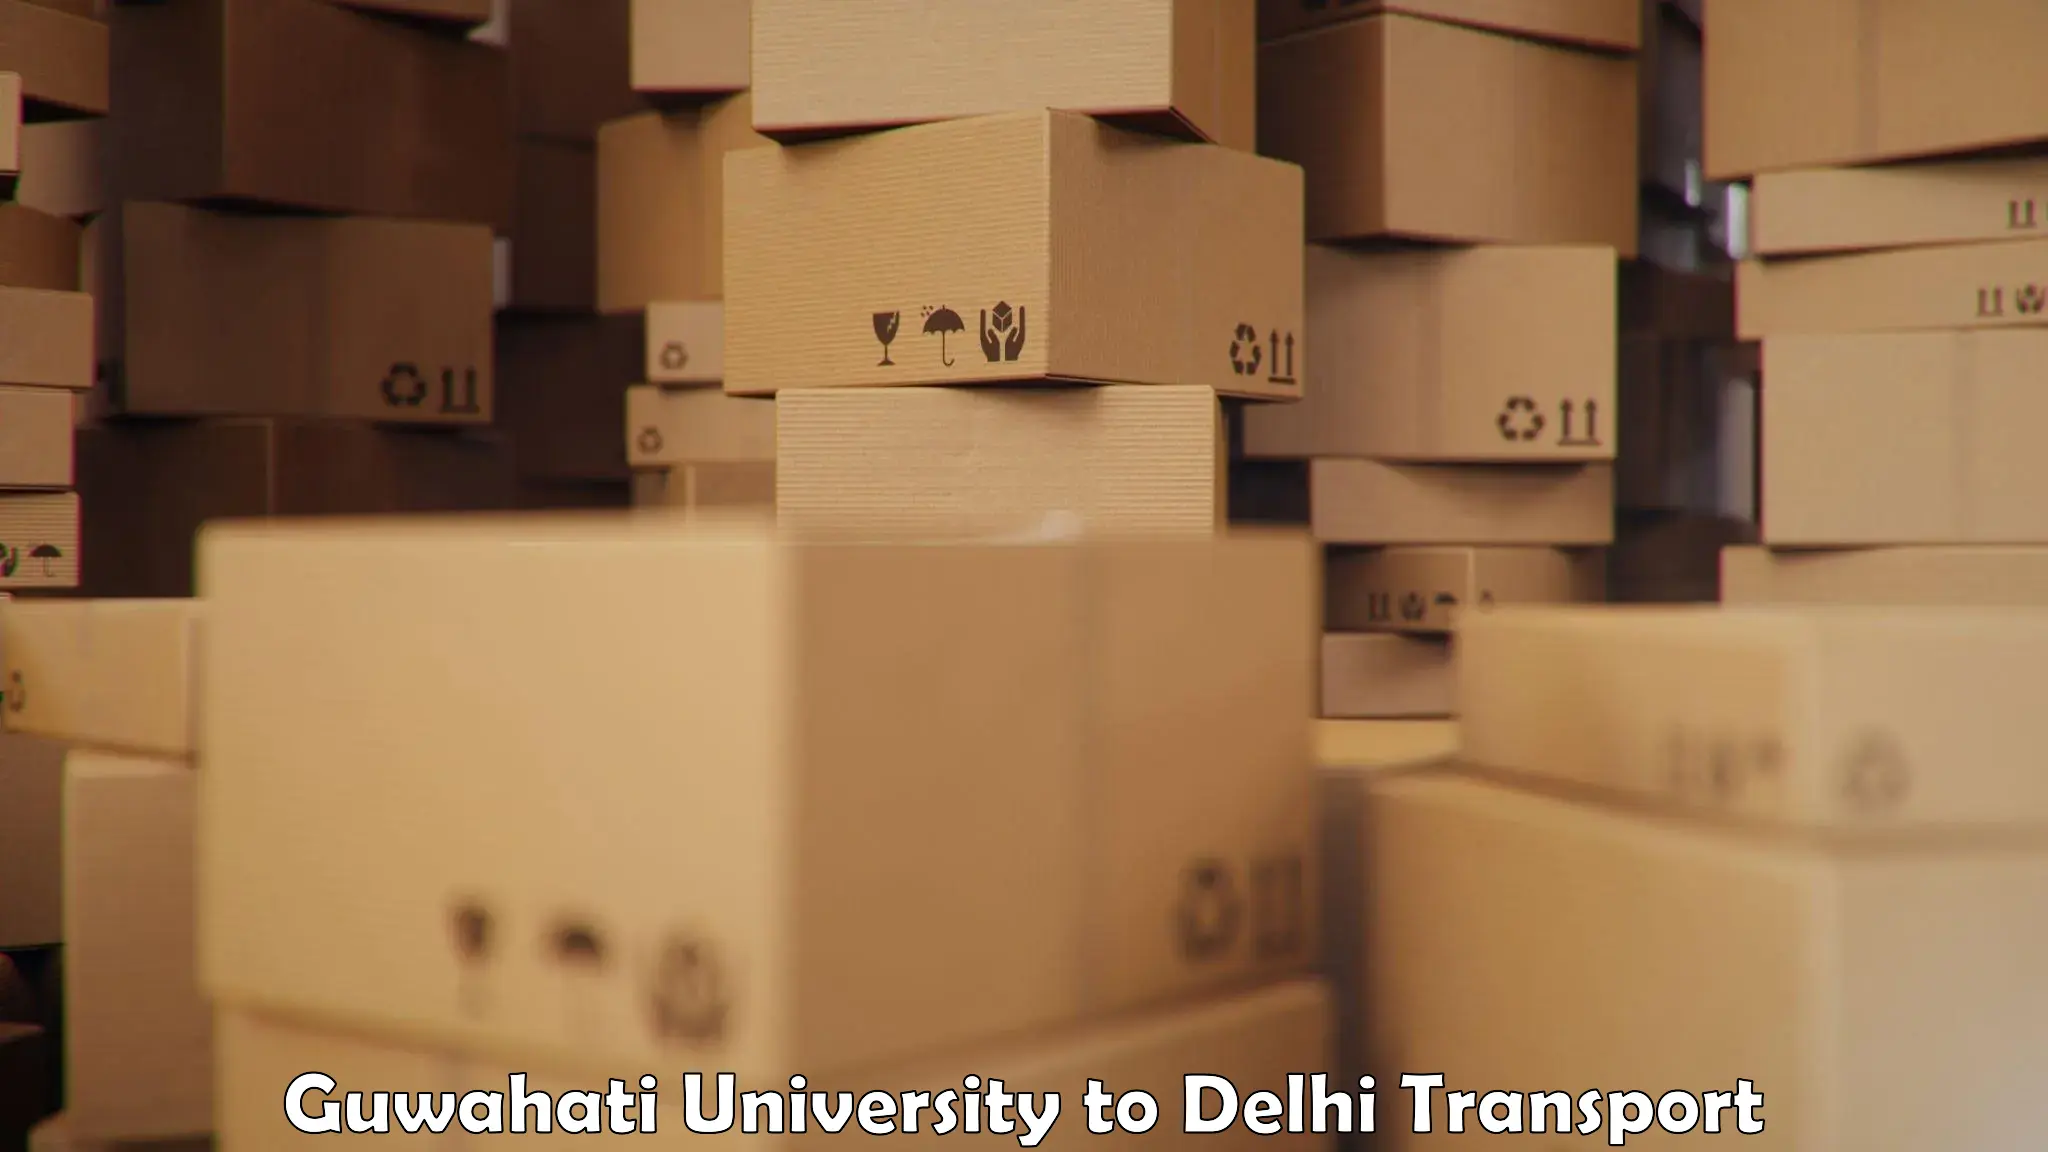 Package delivery services Guwahati University to Kalkaji